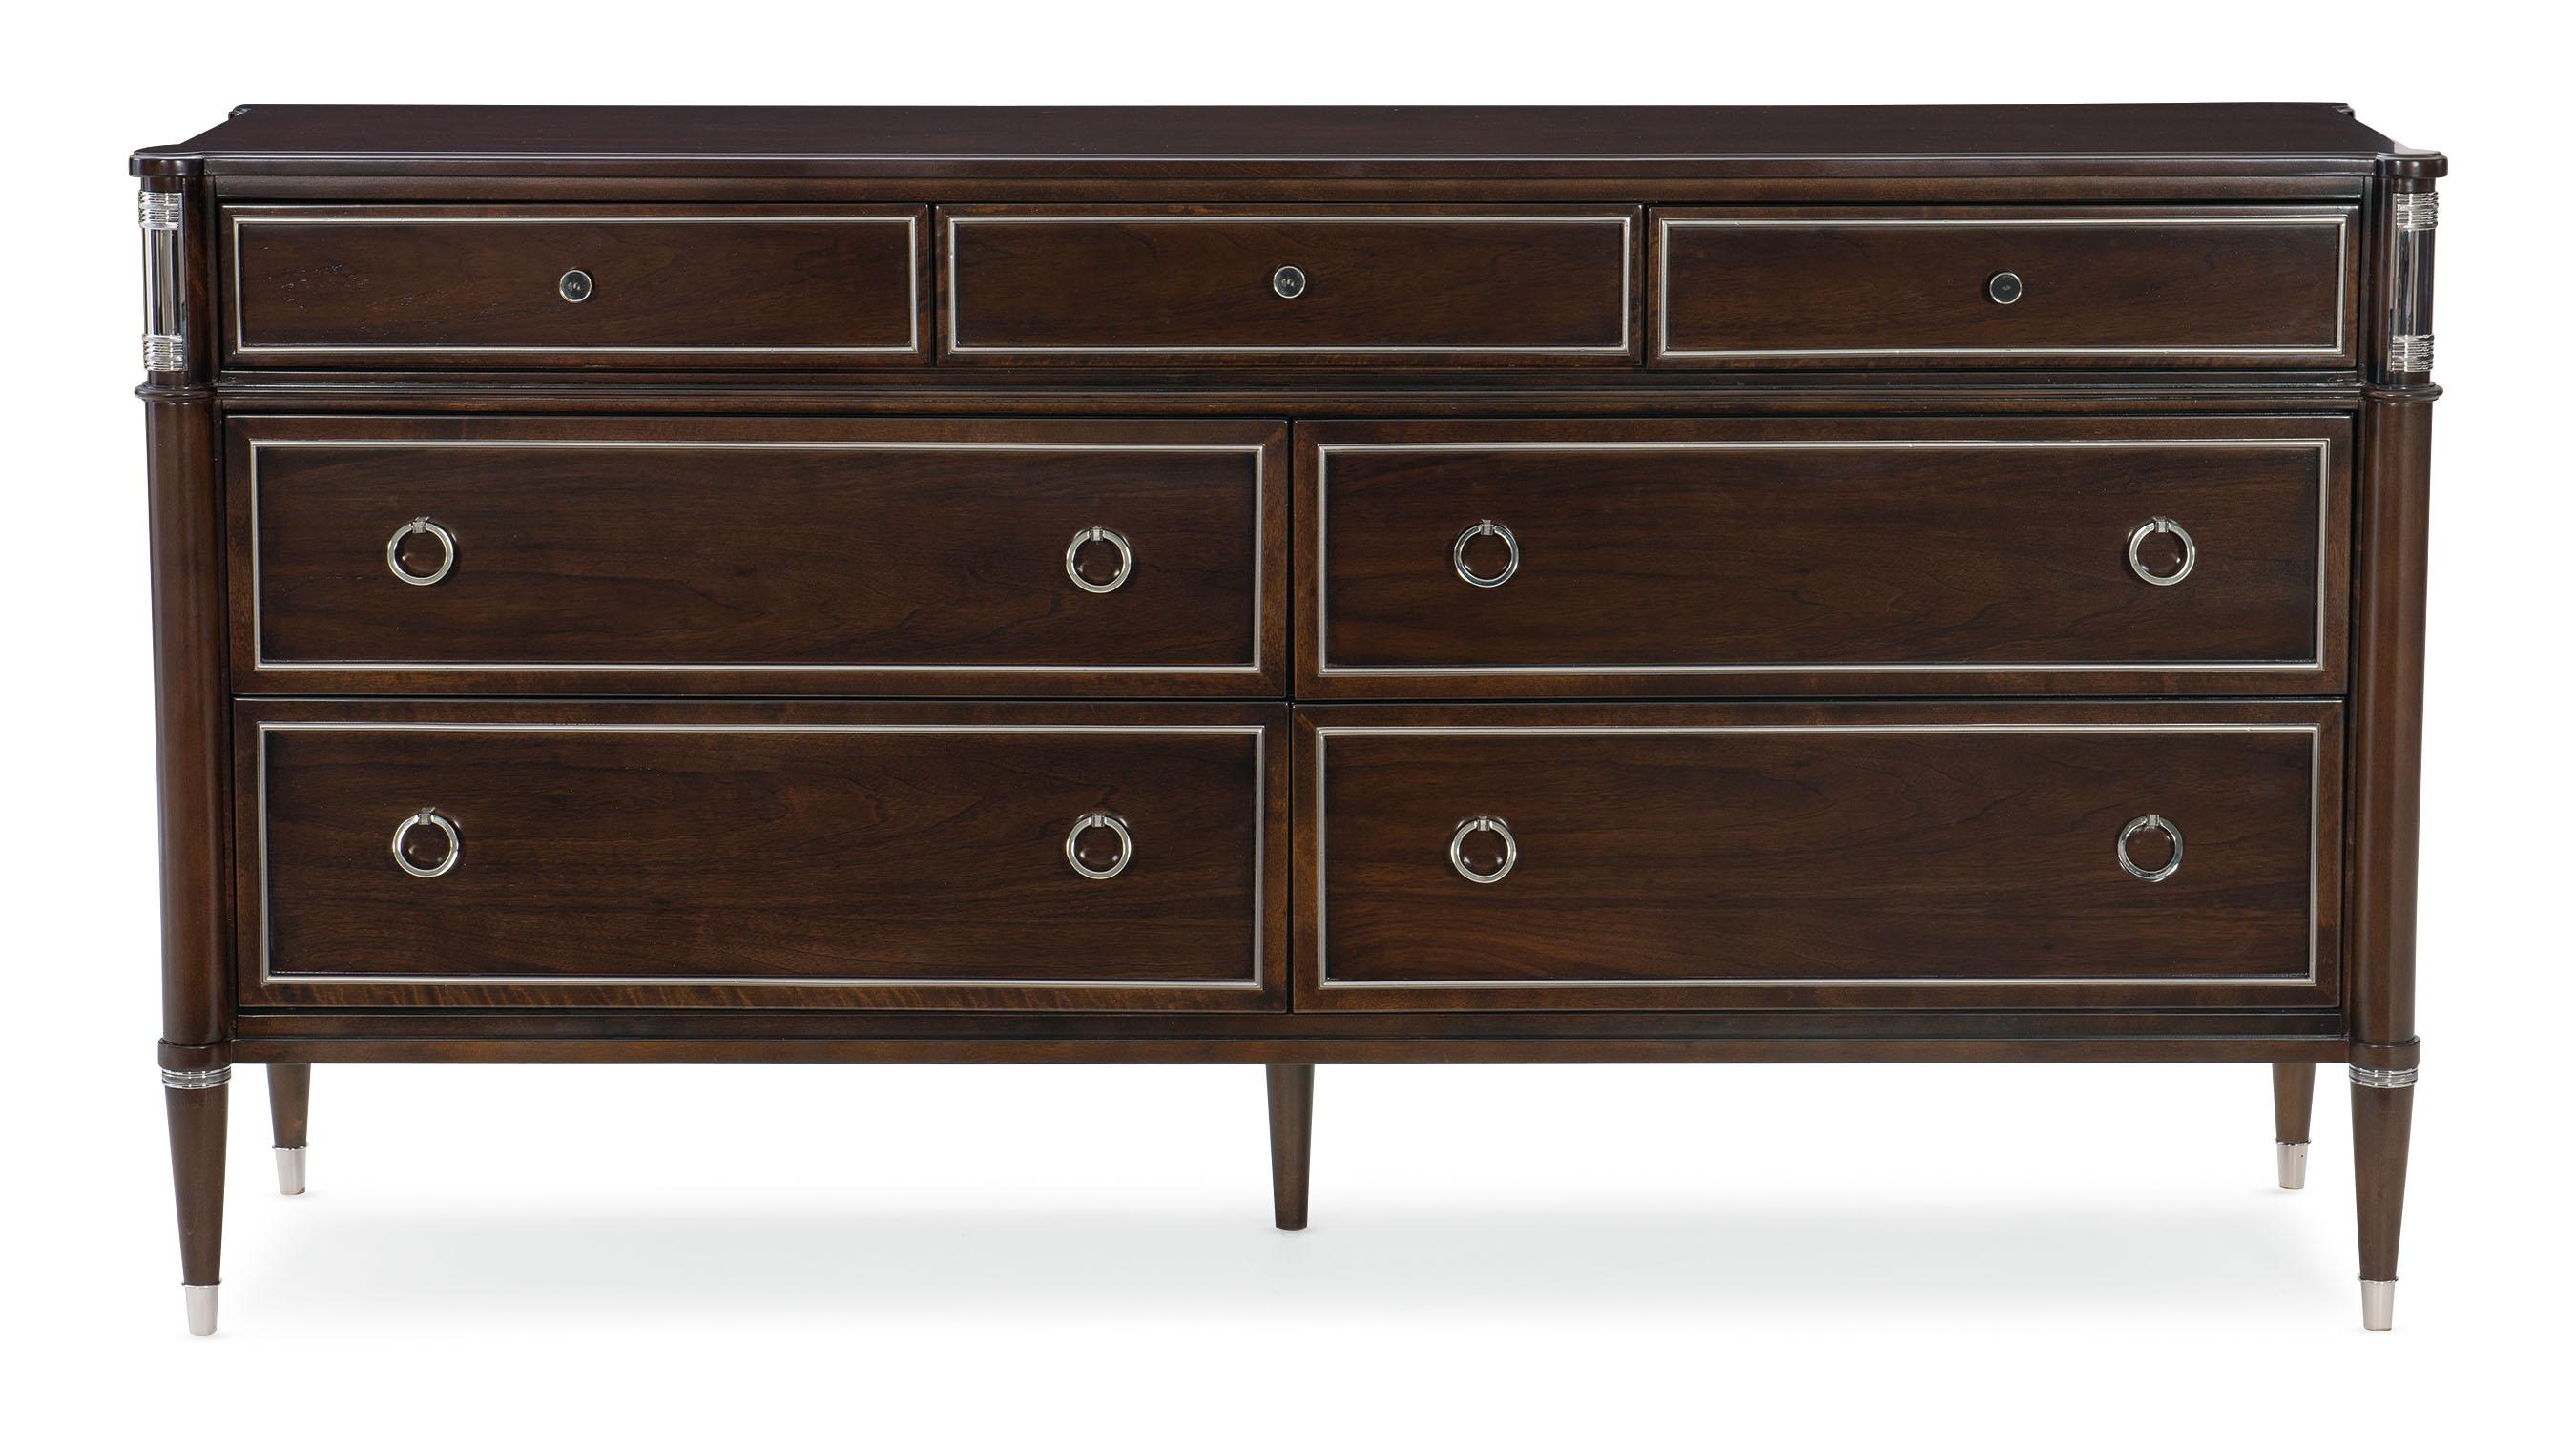 

    
Mocha Walnut & Soft Silver Paint Finish Dresser PRIVATE SUITE by Caracole
